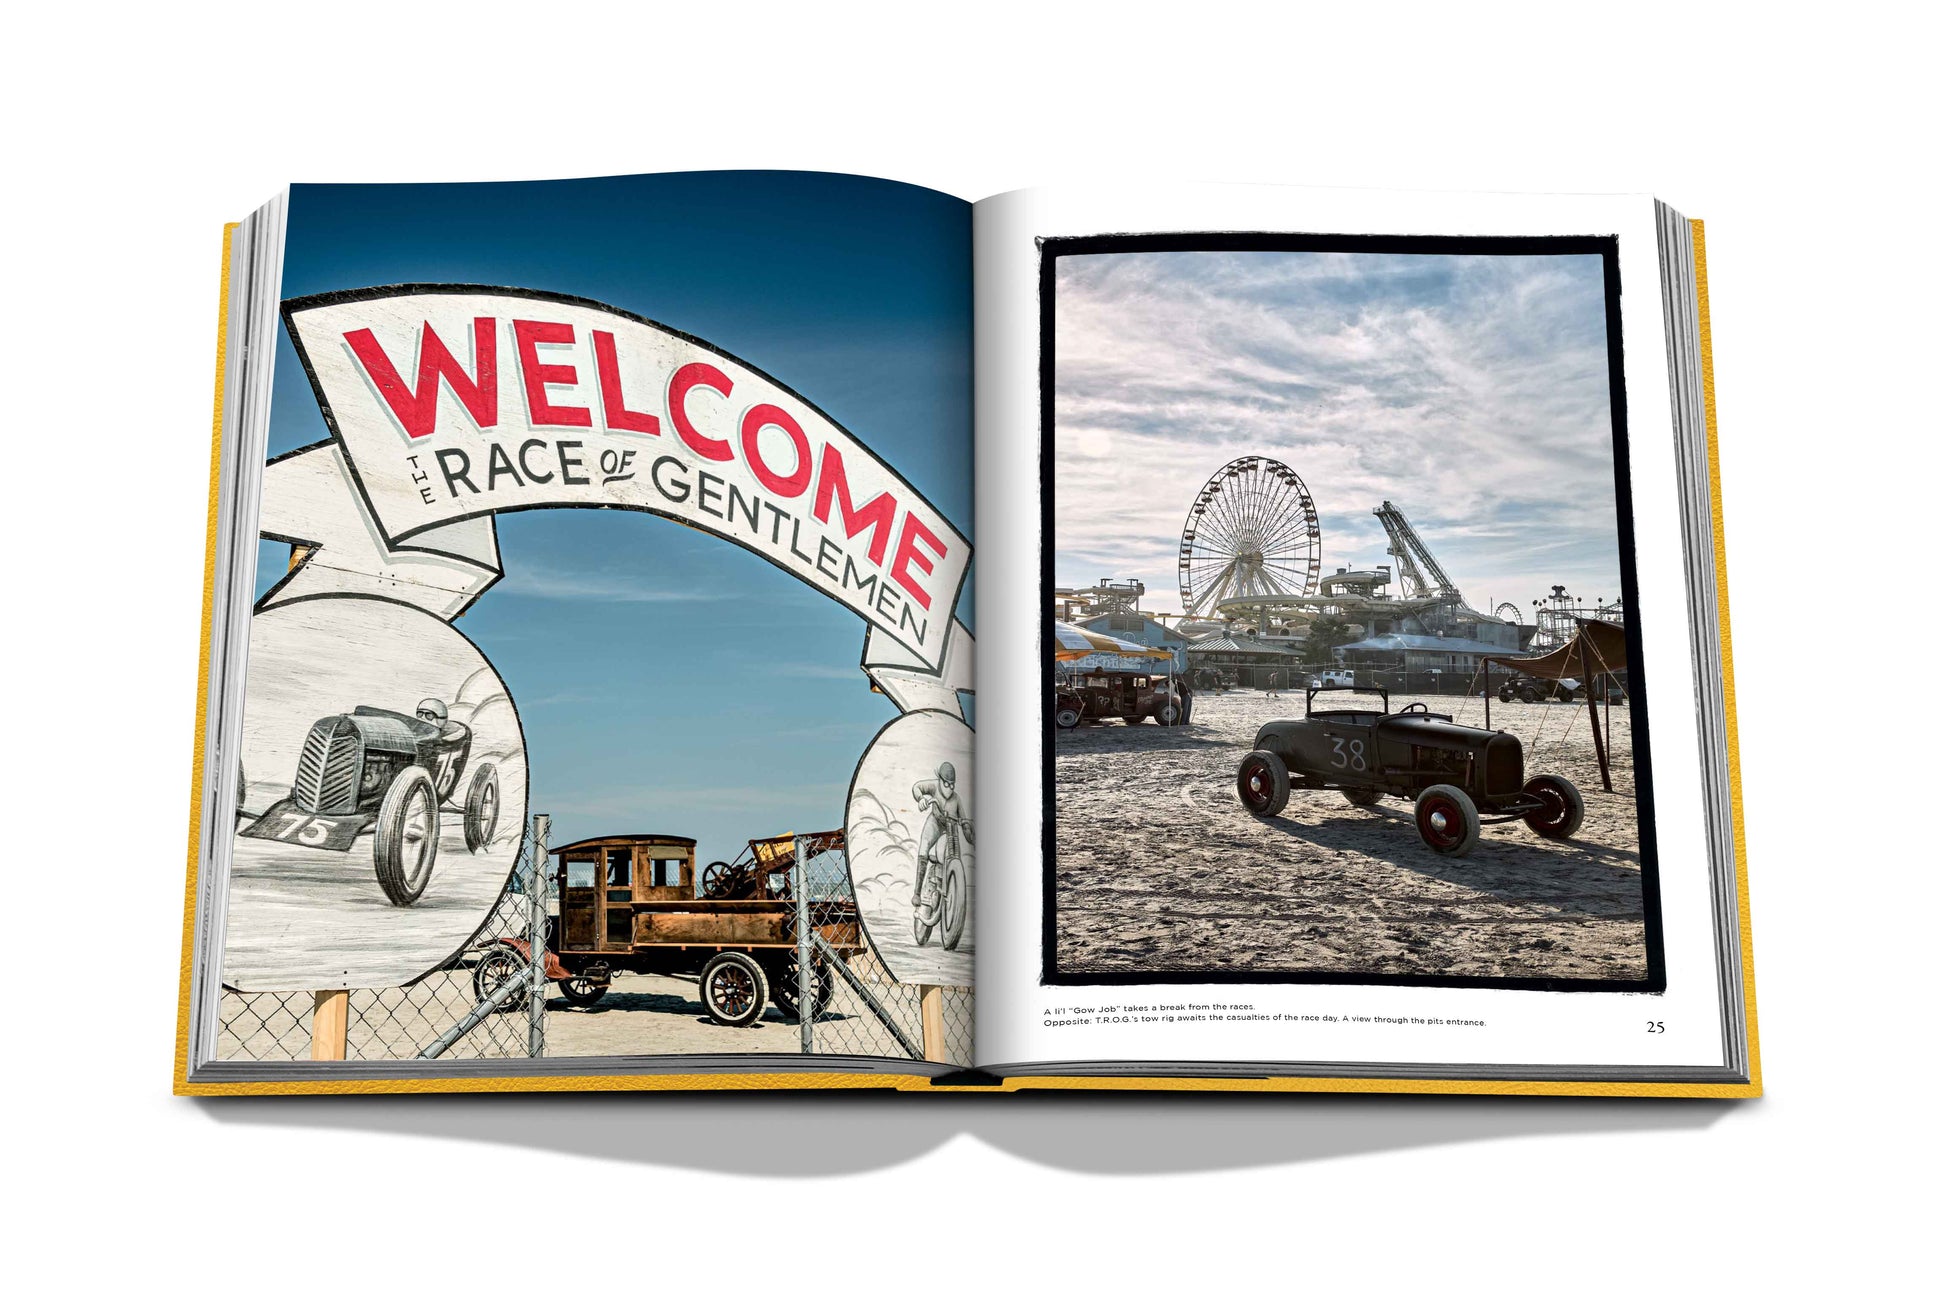 Open book featuring "The Race of Gentlemen" event titled "Race of Gentlemen" with illustrations and a photograph of American hot rod culture on a beachside race track by Assouline.